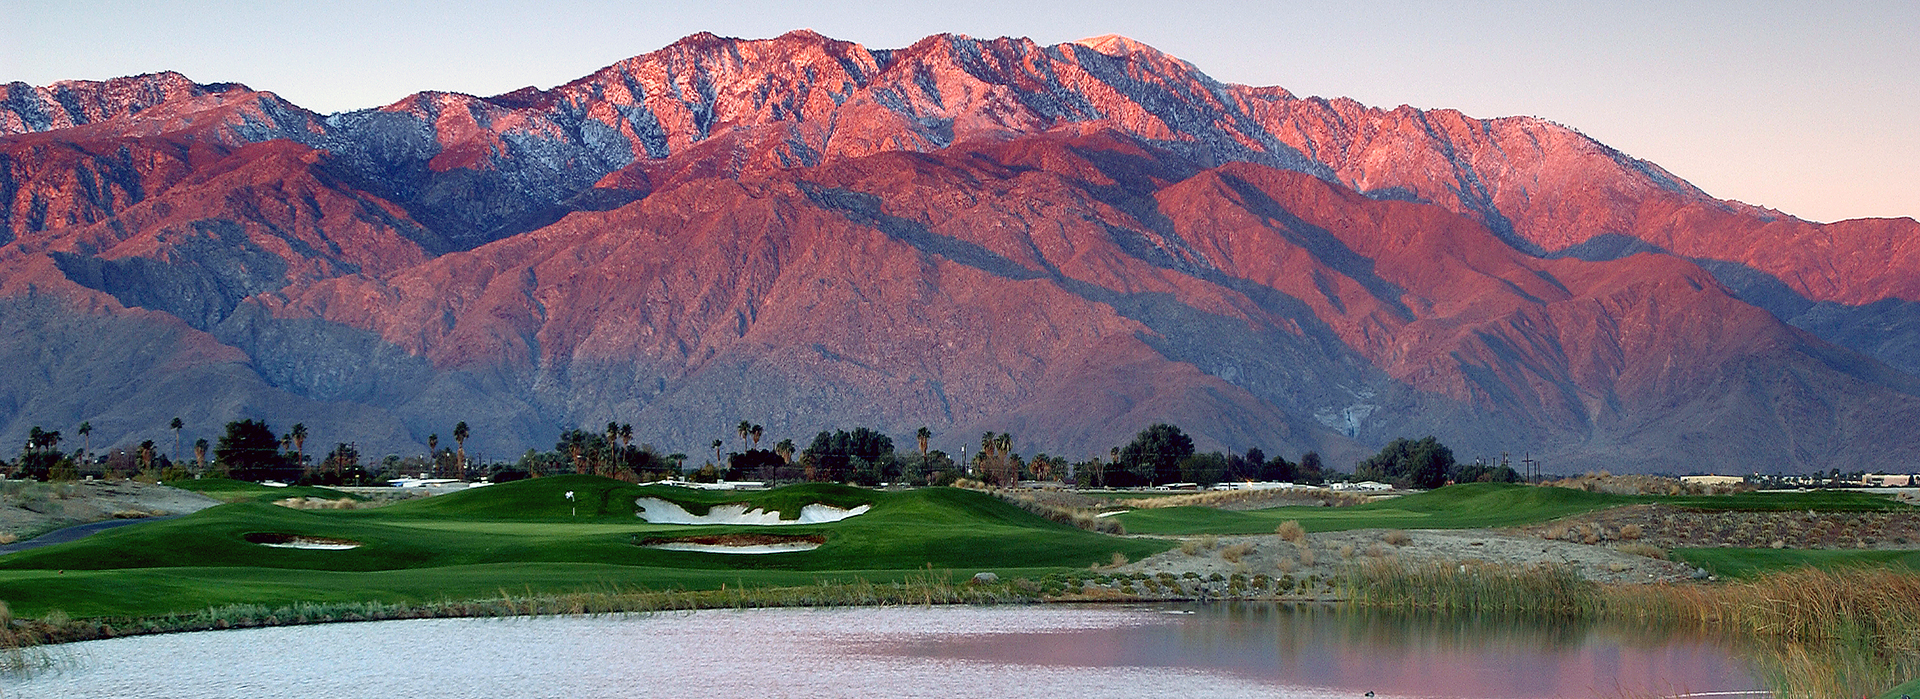 view of golf course with mountains